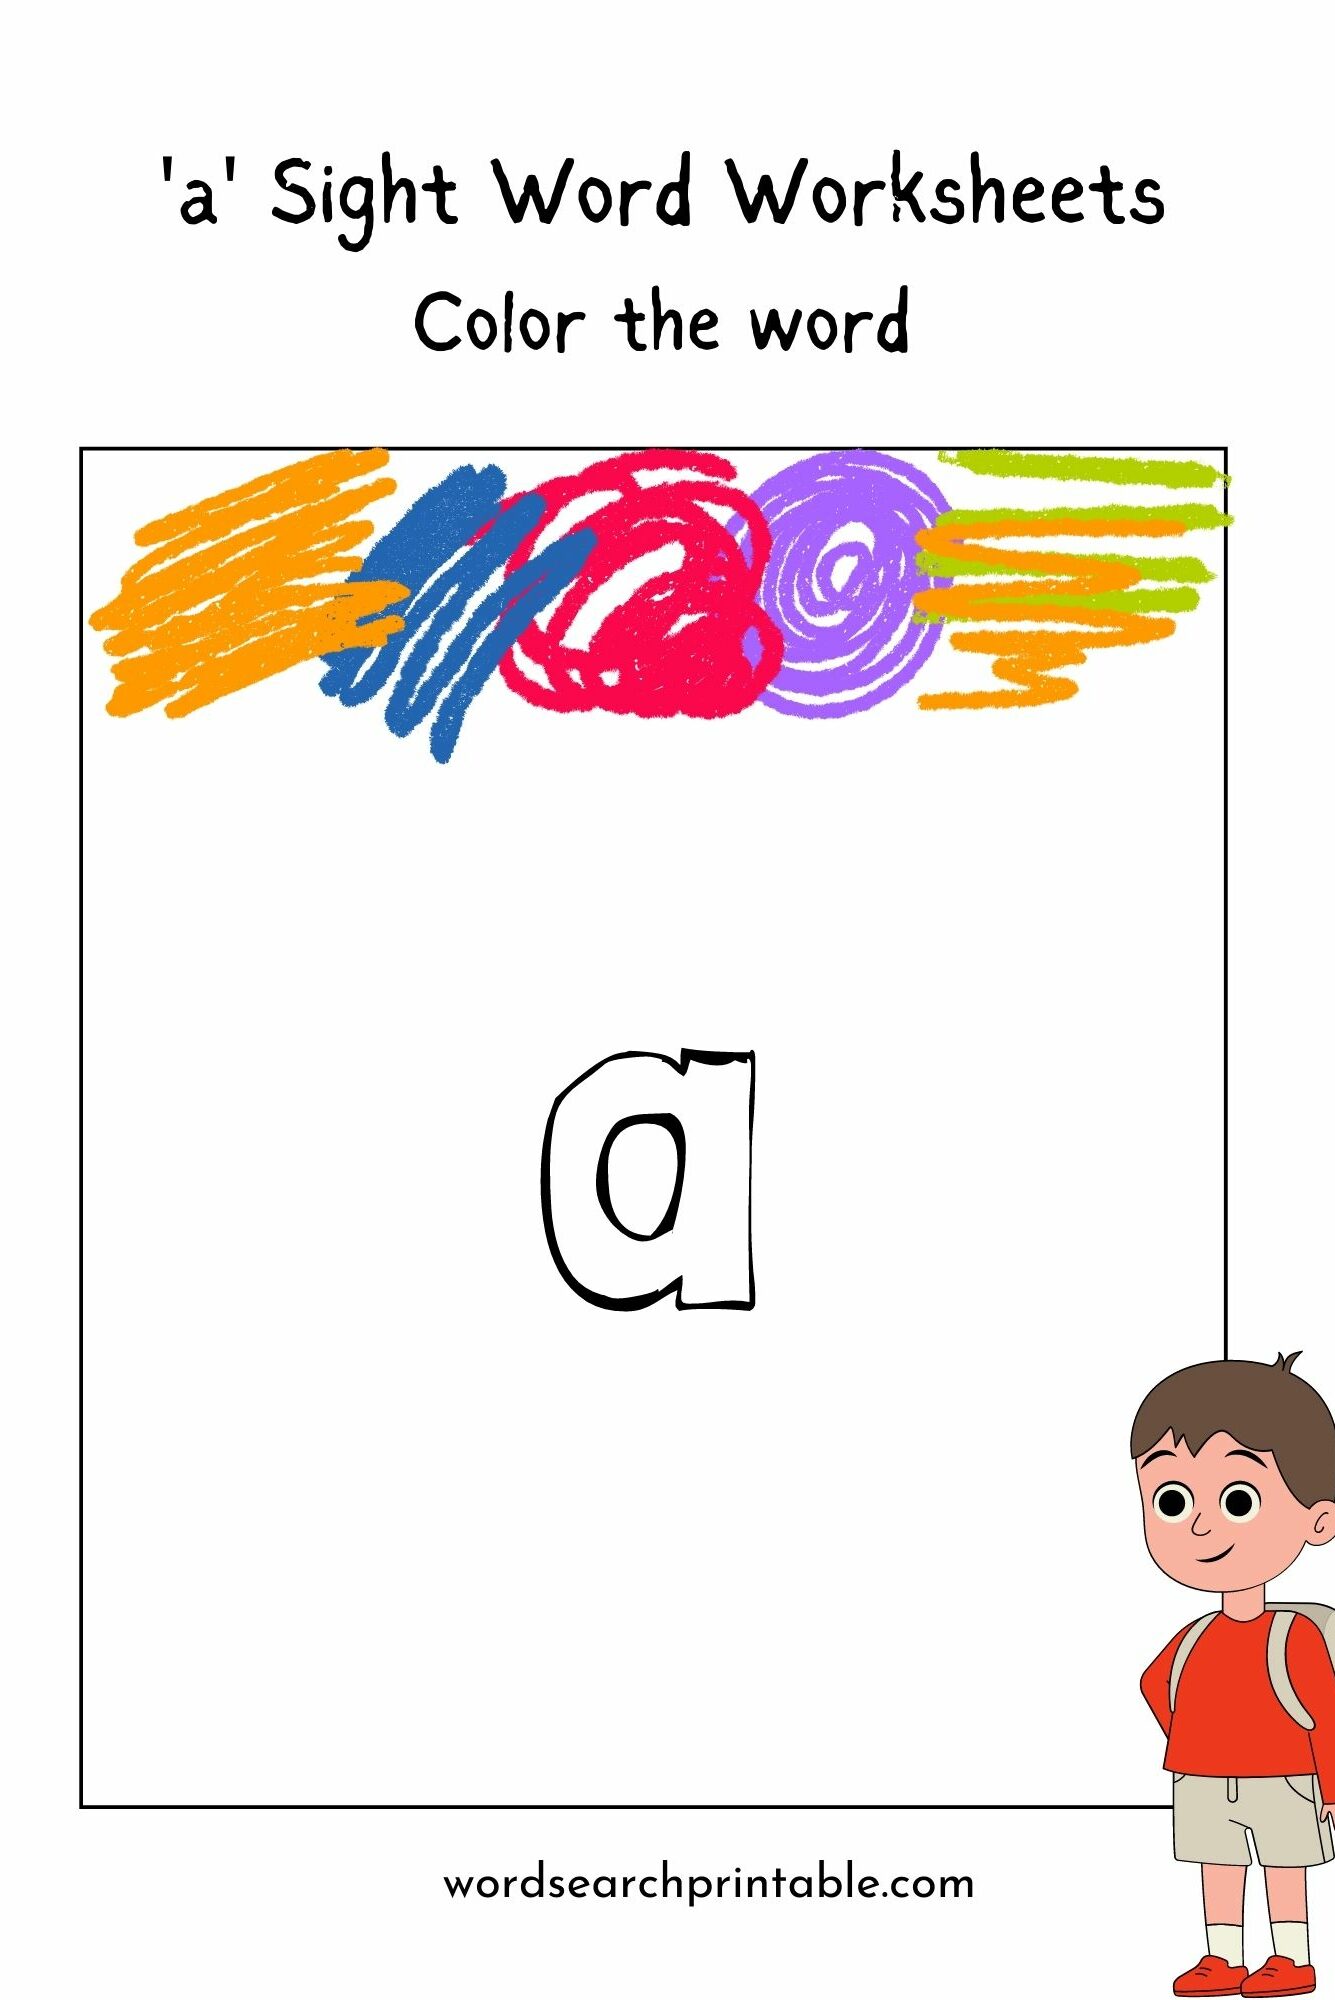 Color the sight word 'a'